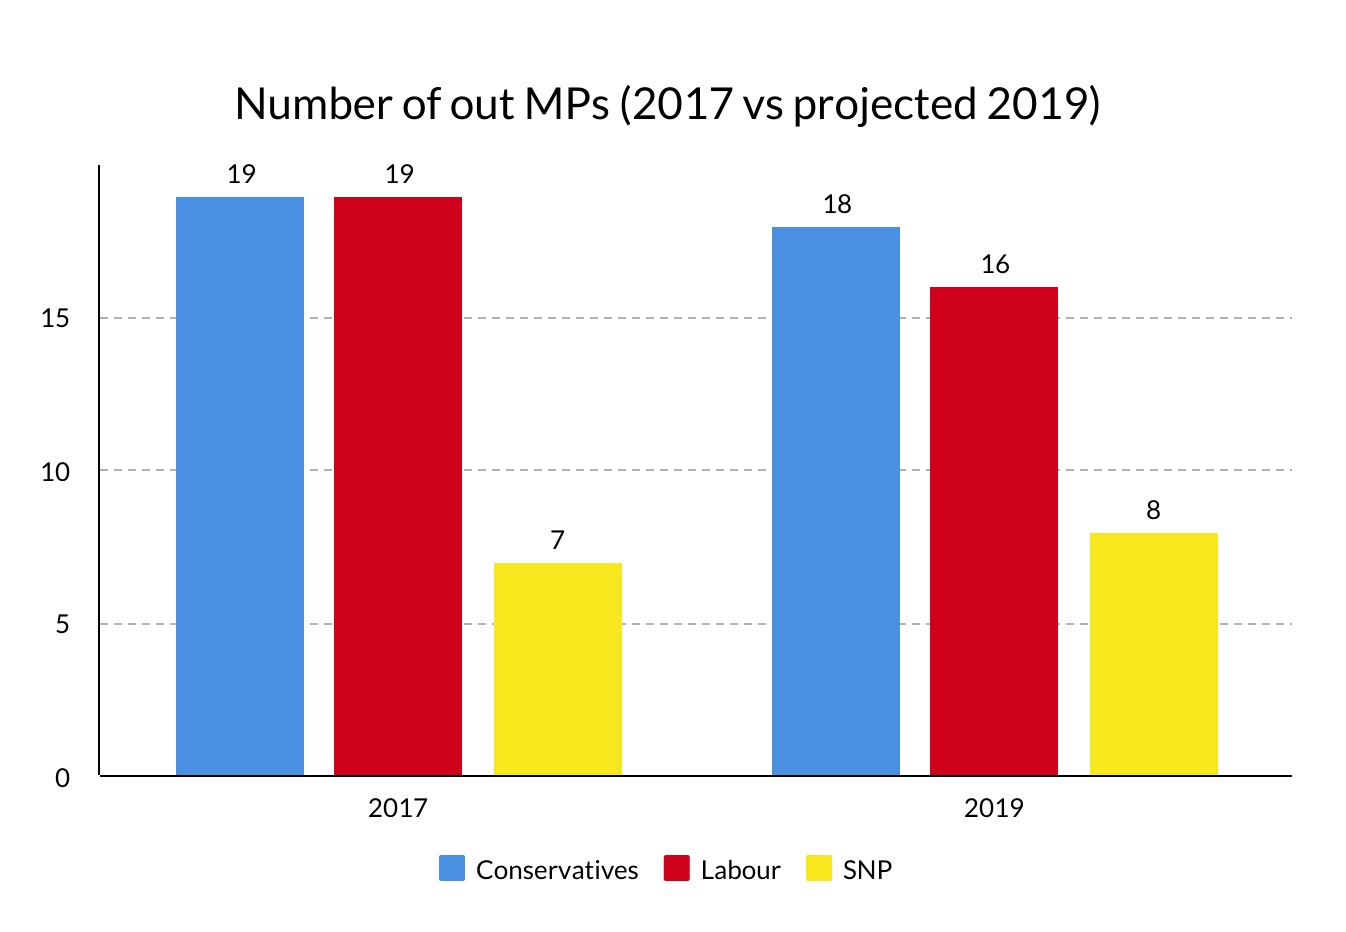 Despite the potential changes, odds are that LGBT+ representation in the House of Commons will remain stable after the general election